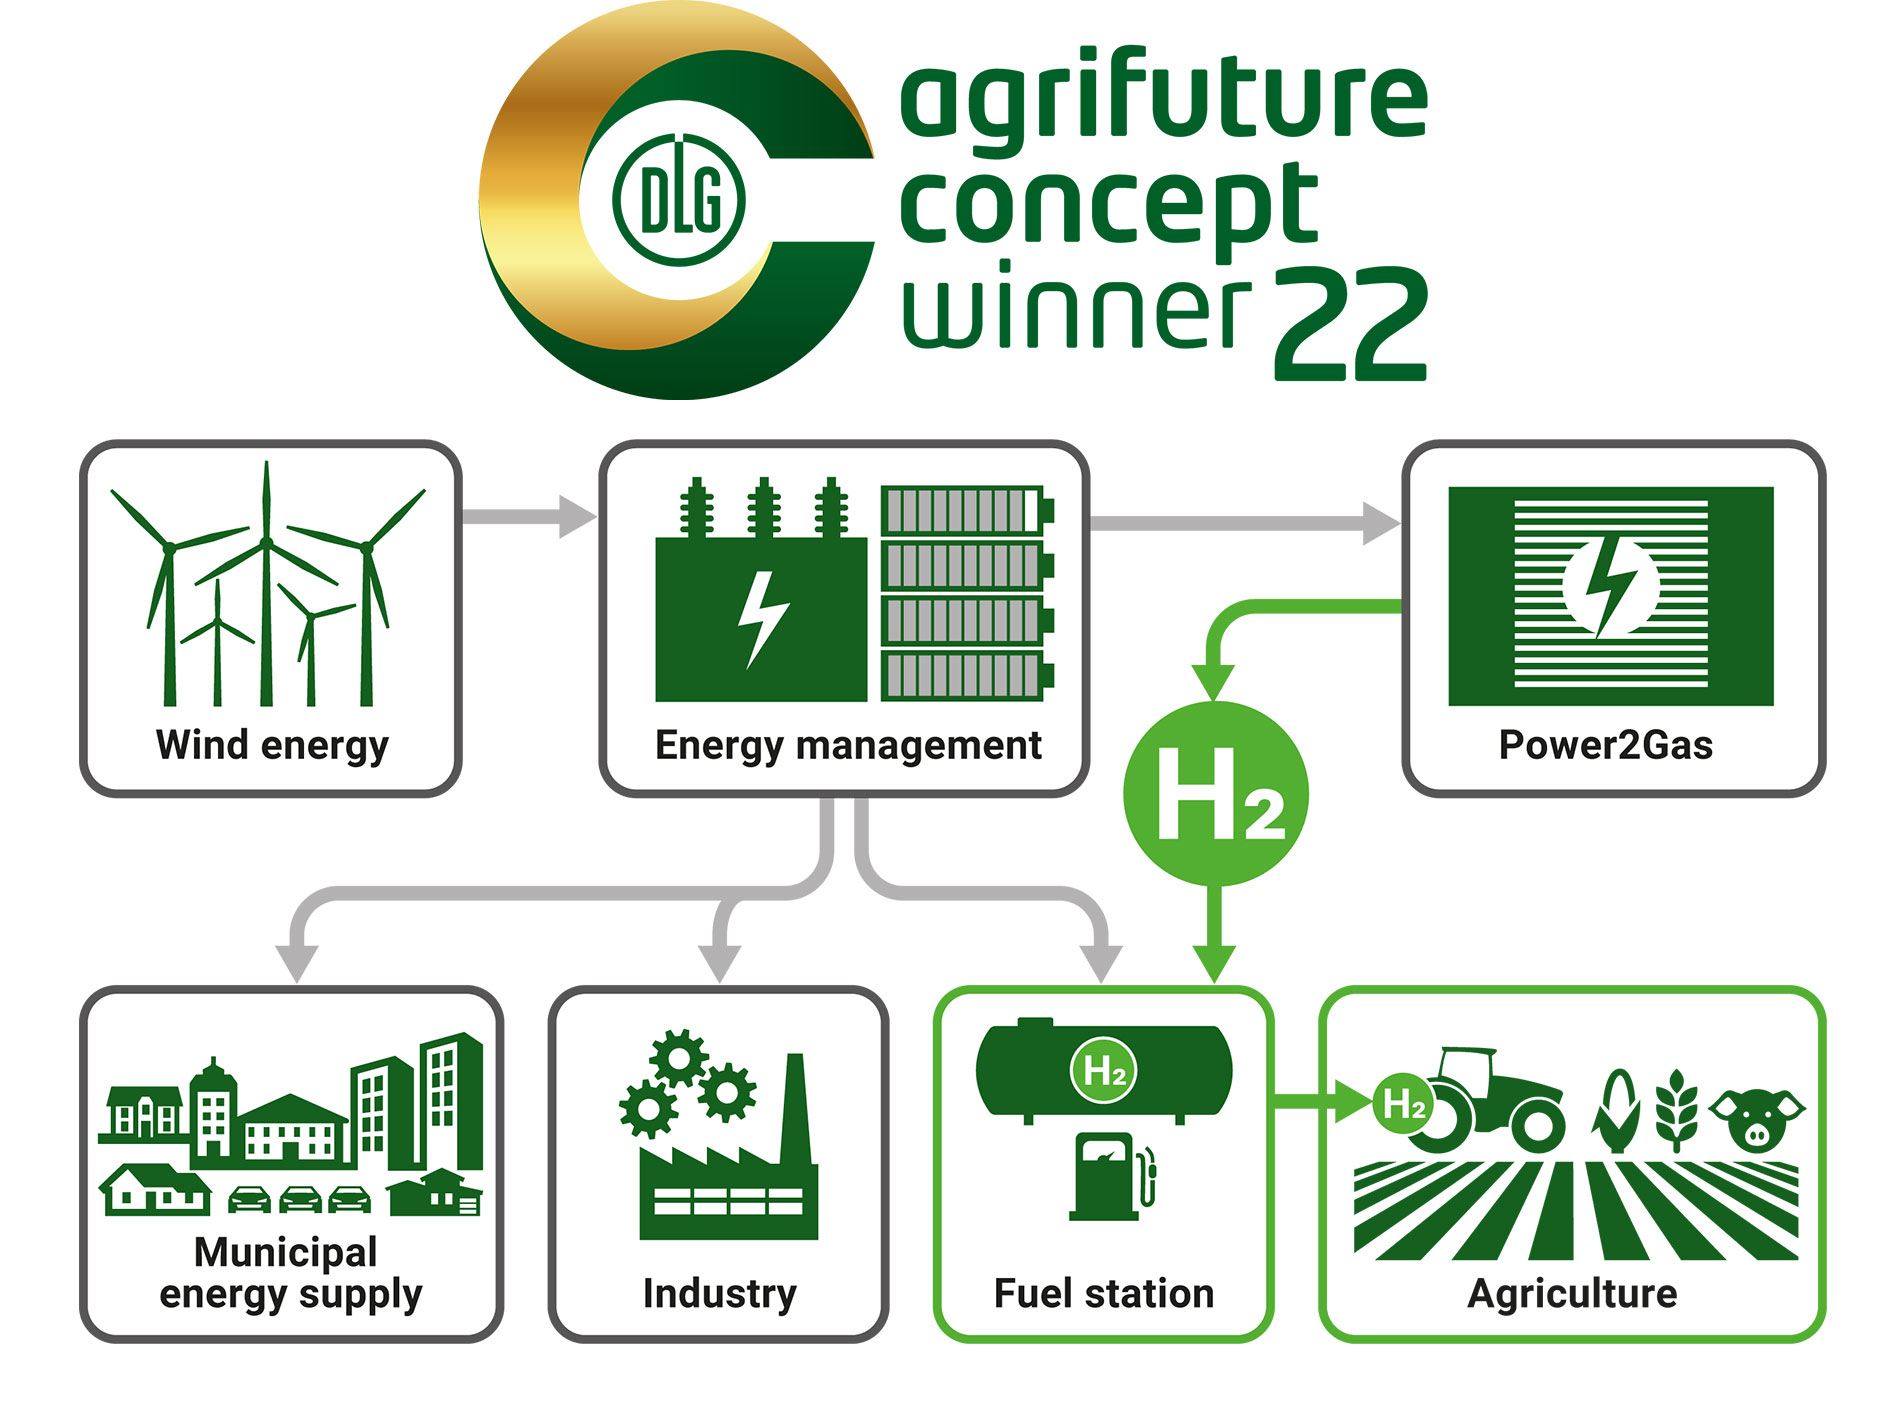 H2Agrar model project honored with DLG Agrifuture Concept Award 2022